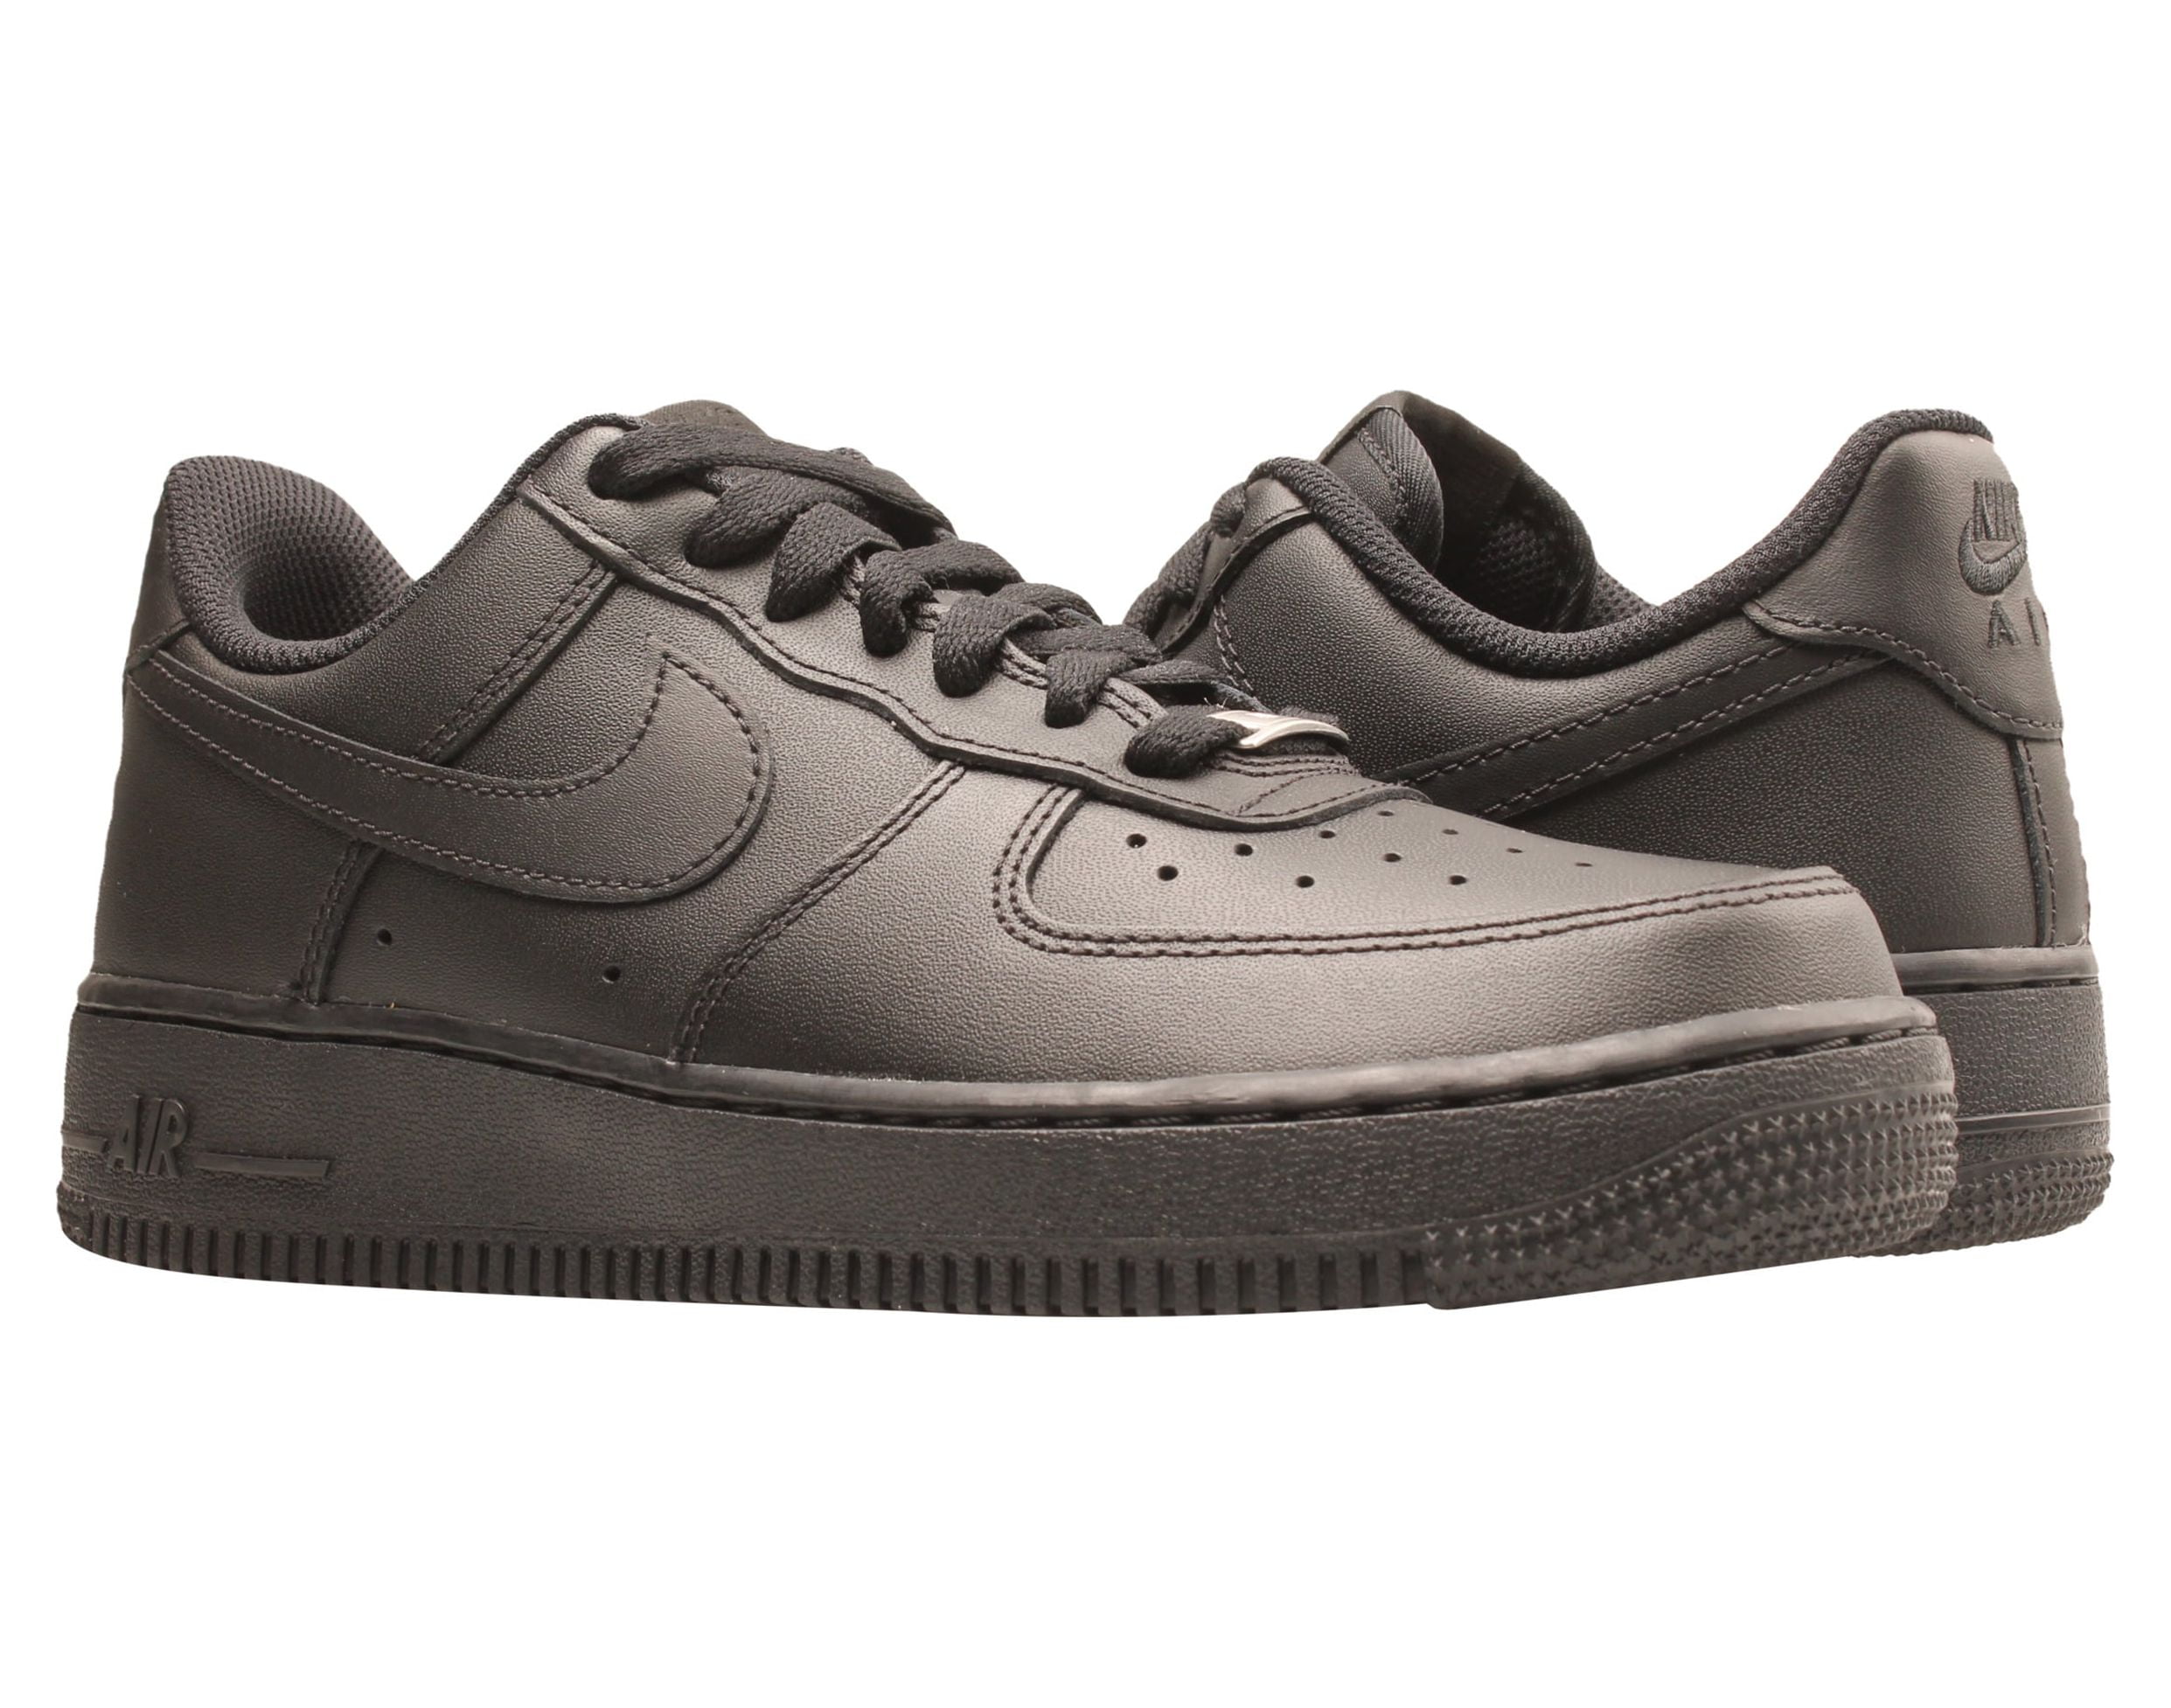 Nike Air Force 1 '07 Men's Shoes 10.5